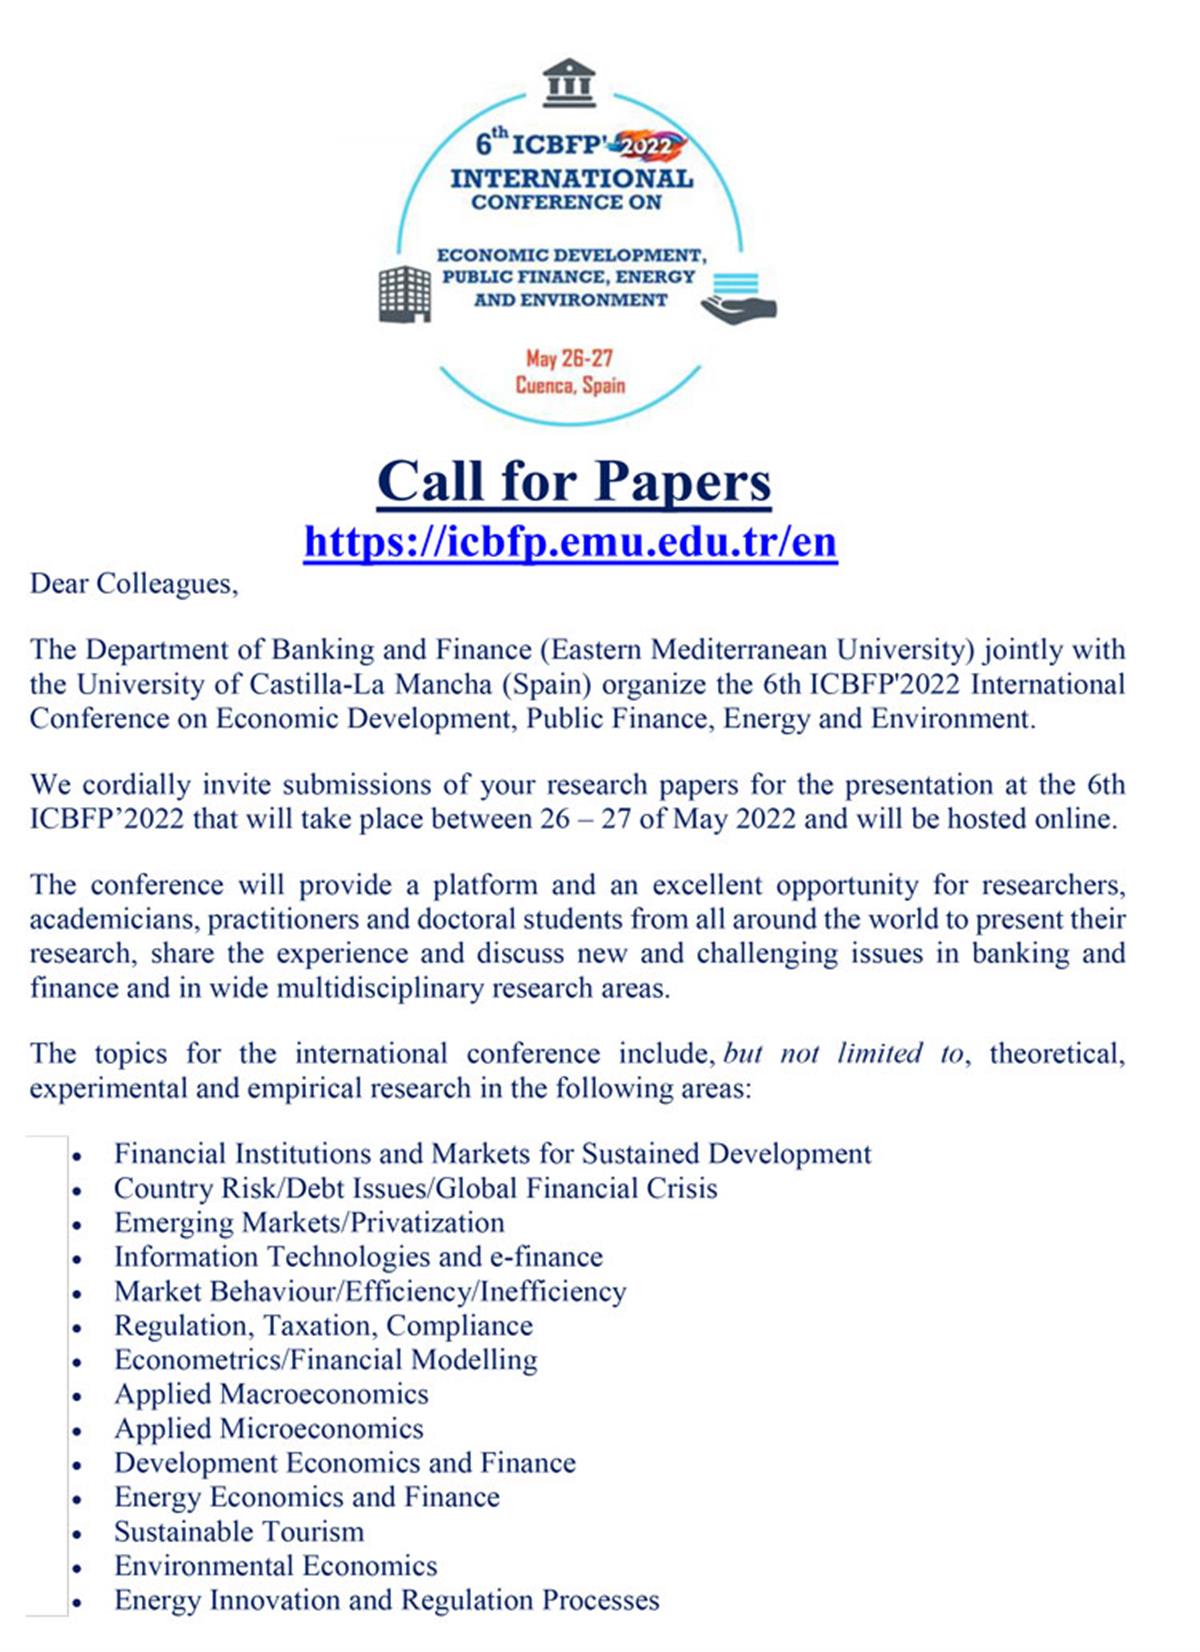 Call for Papers - 6th ICBFP 2022, Department of Banking Finance 